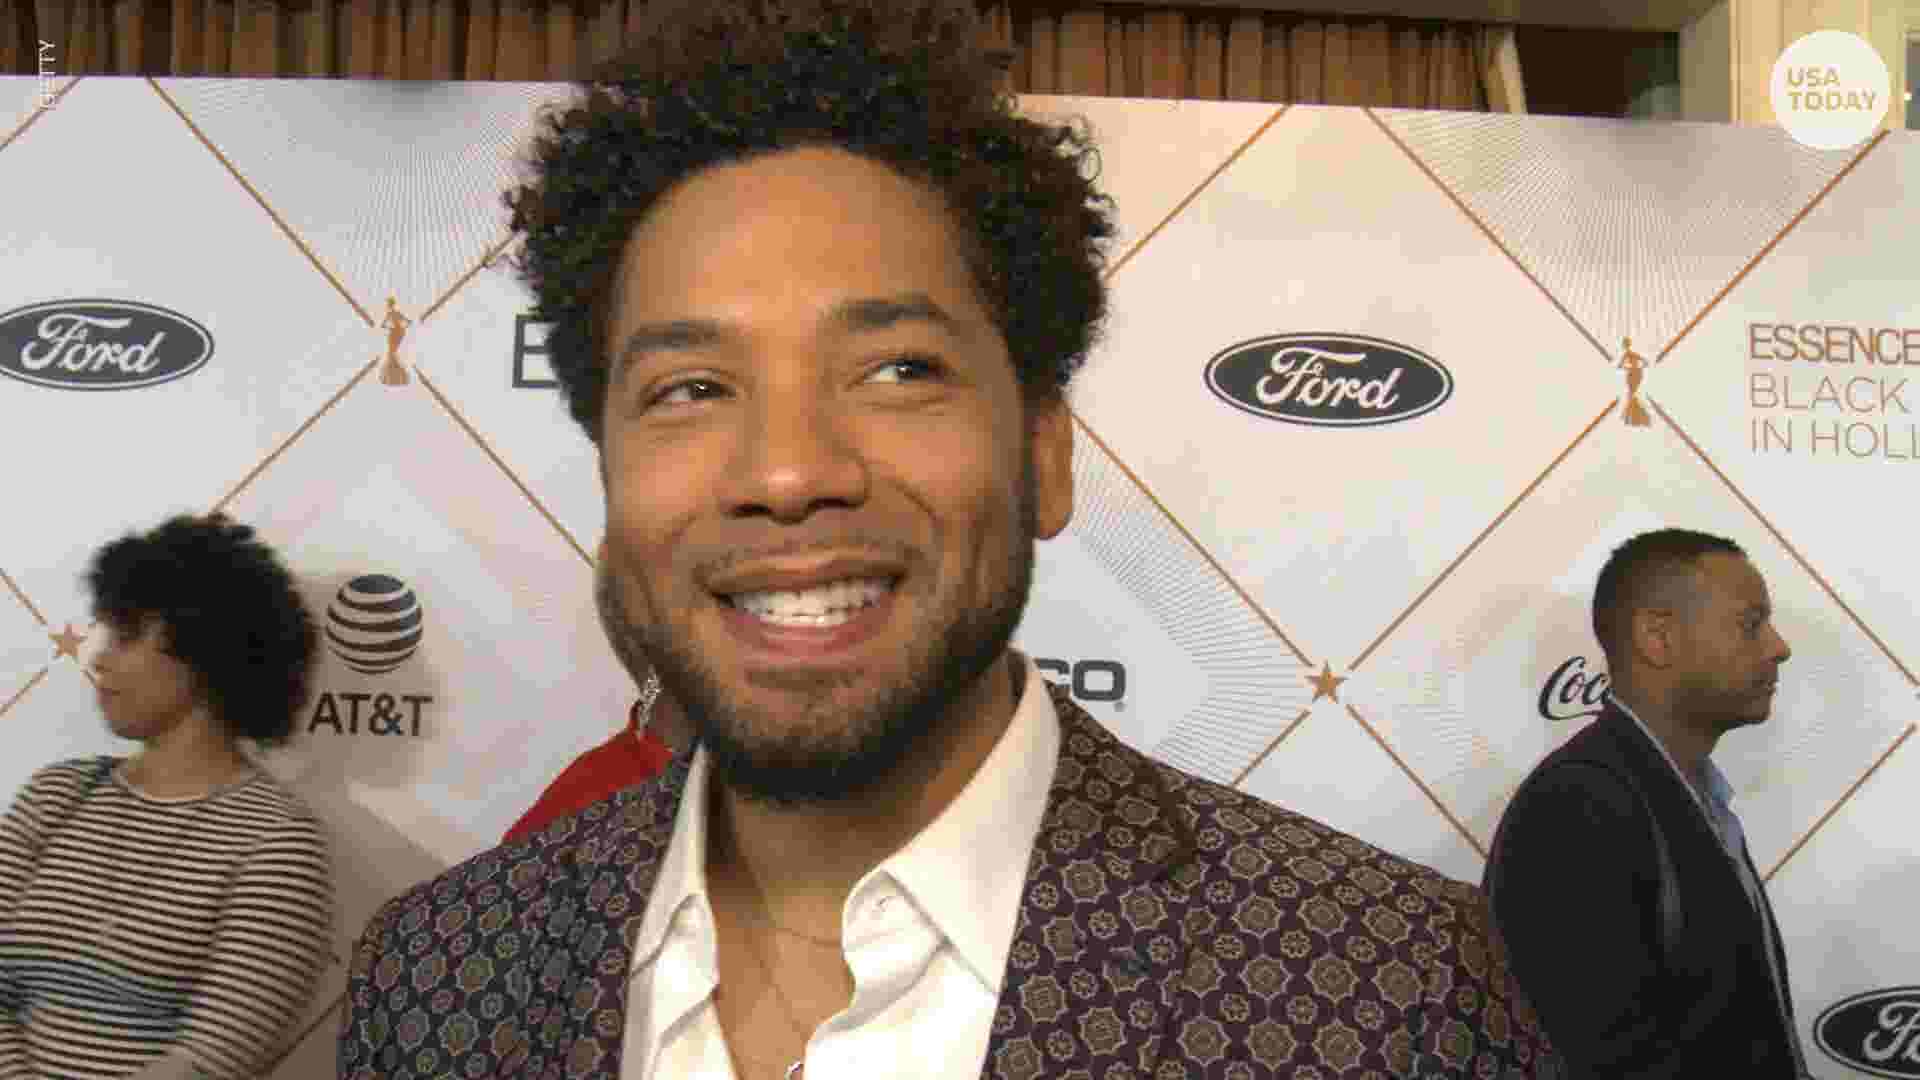 Celebrities and politicians rally behind Jussie Smollett after attack